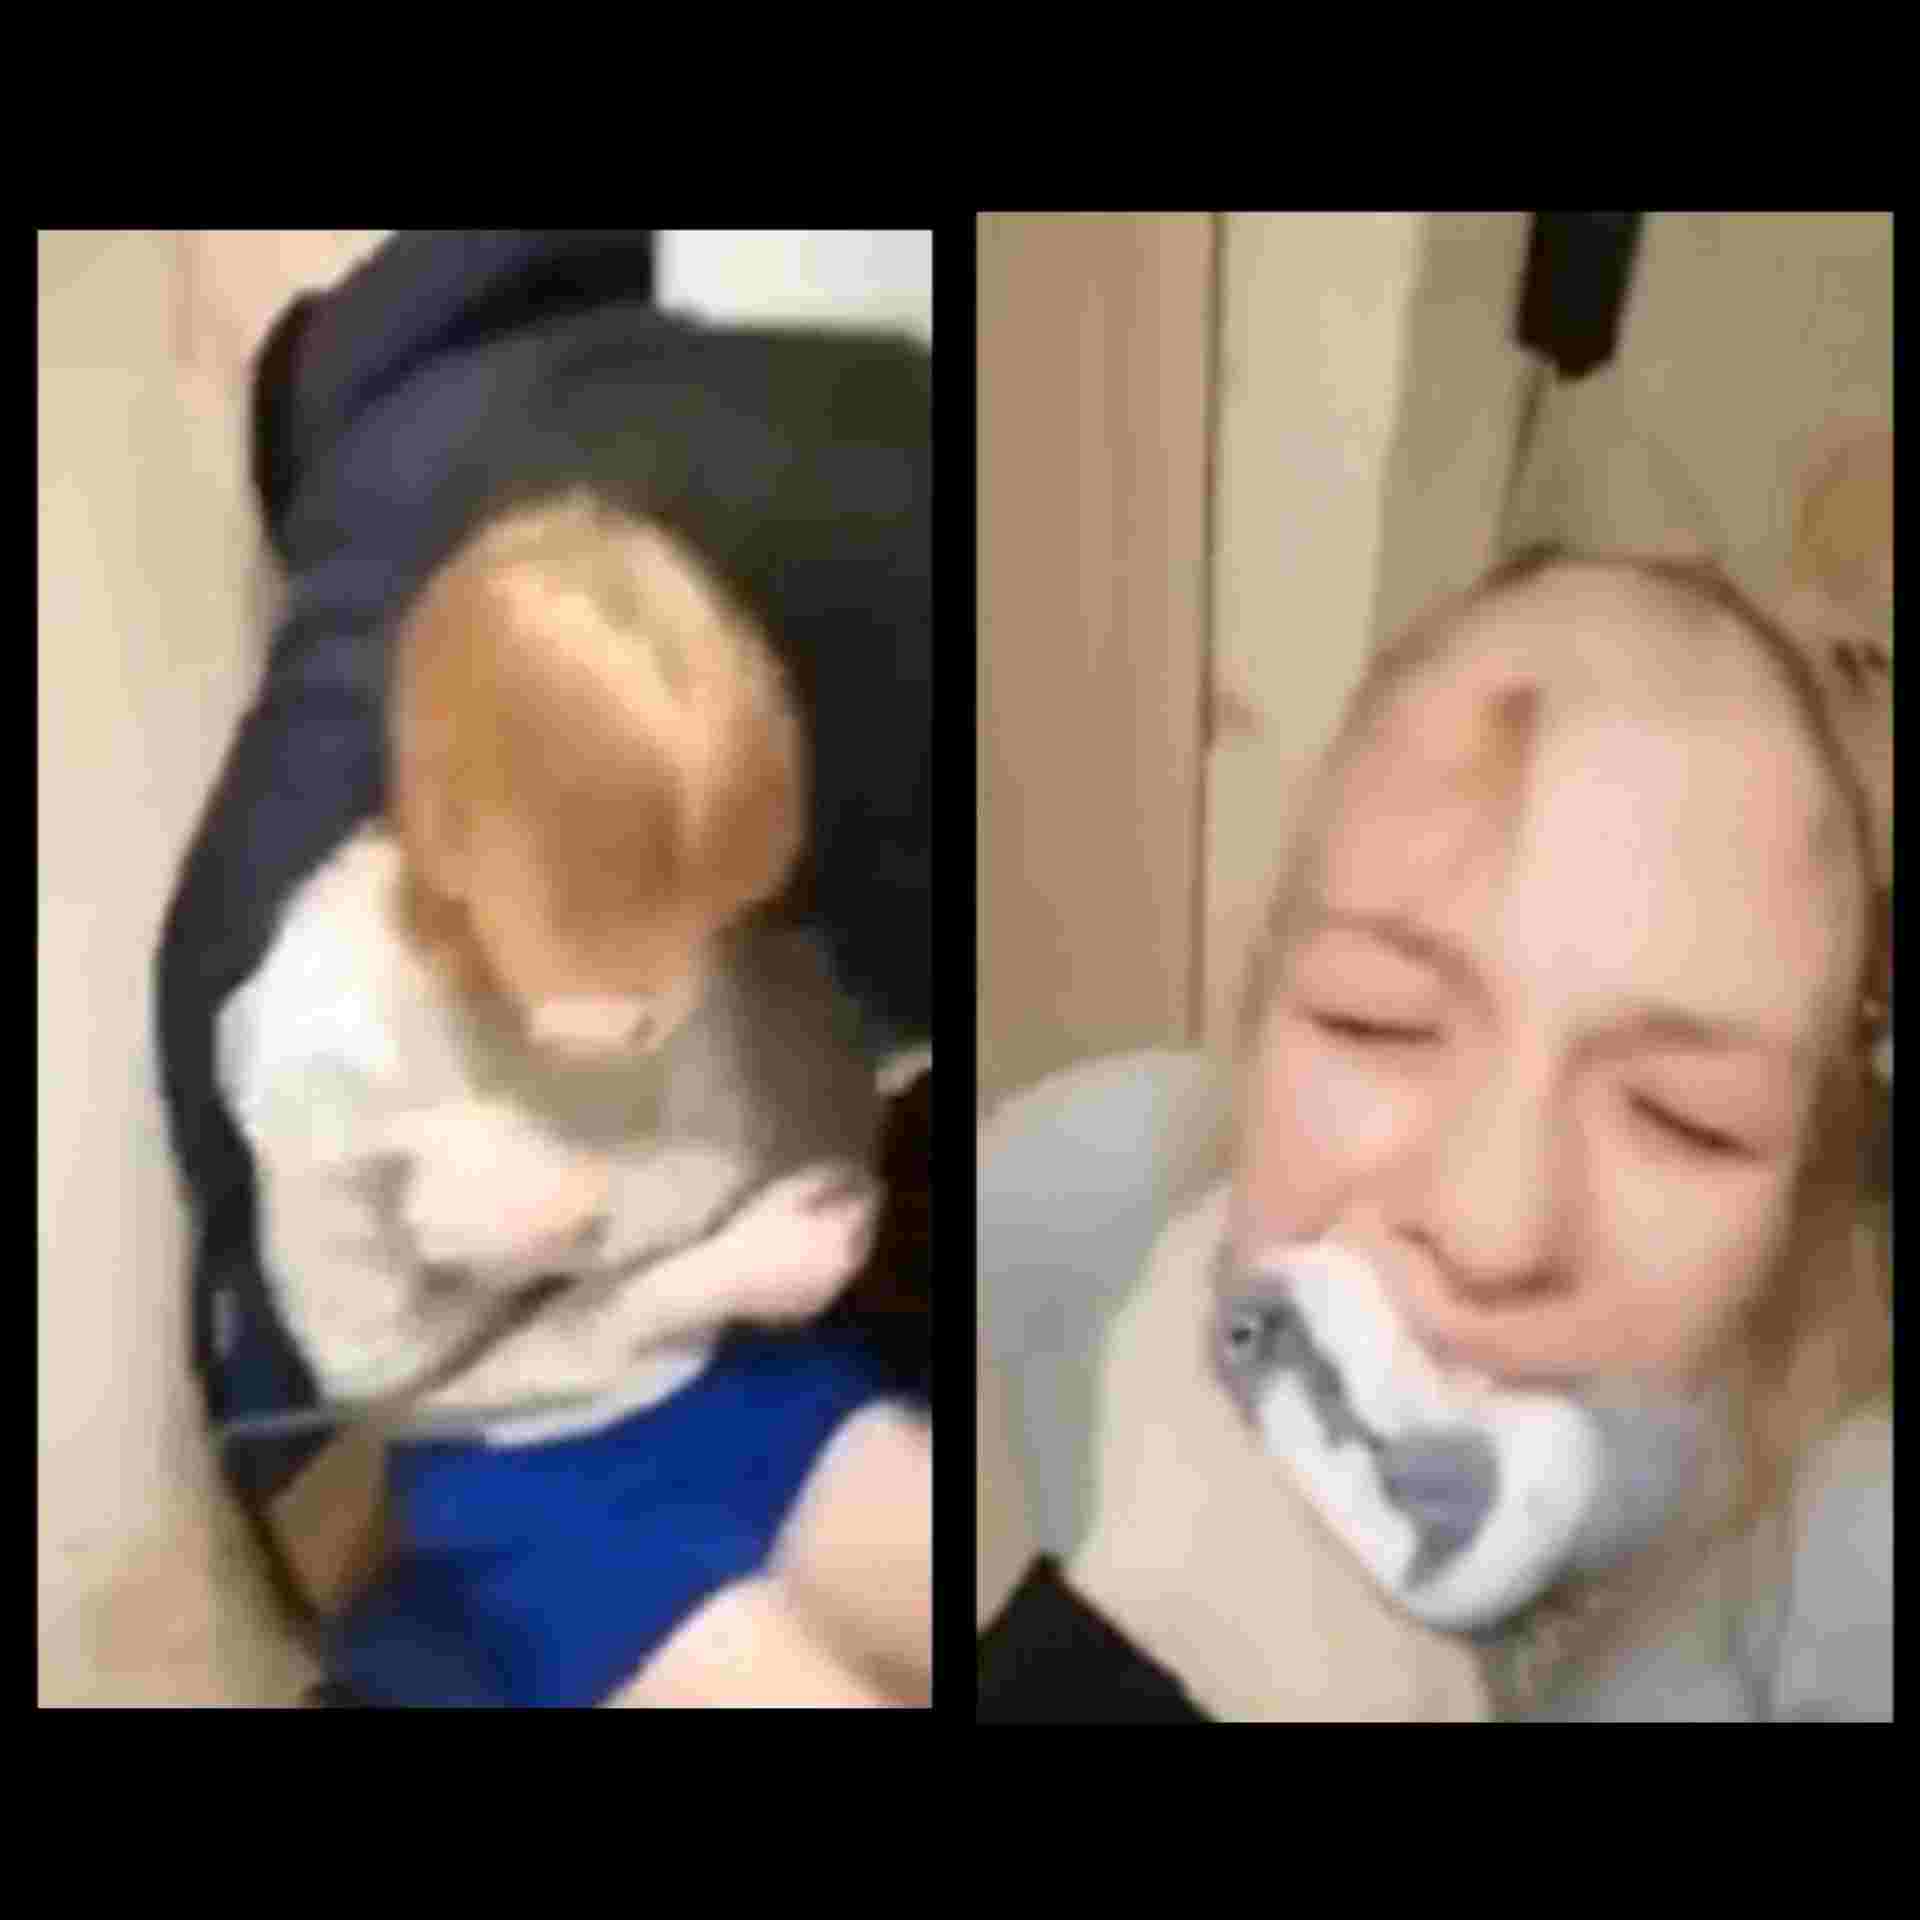 Pretty White Russian Girl Gets Home Invaded/ Tied Up And Head Shaved